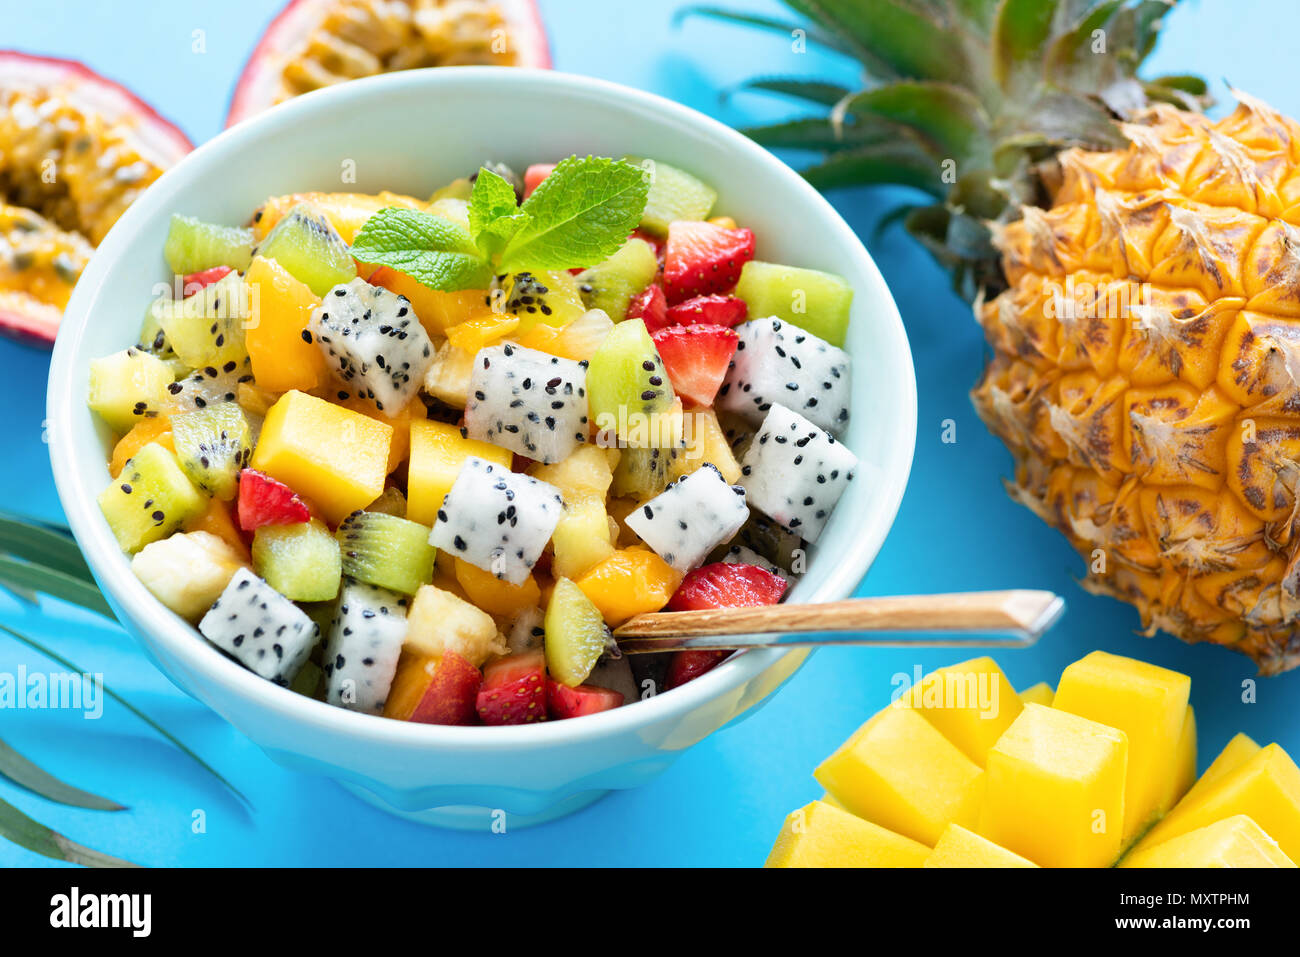 Fruit salad in bowl on blue background. Exotic tropical fruit salad. Dragon fruit, passion fruit, mango, coconut, strawberry and pineapple salad in a  Stock Photo